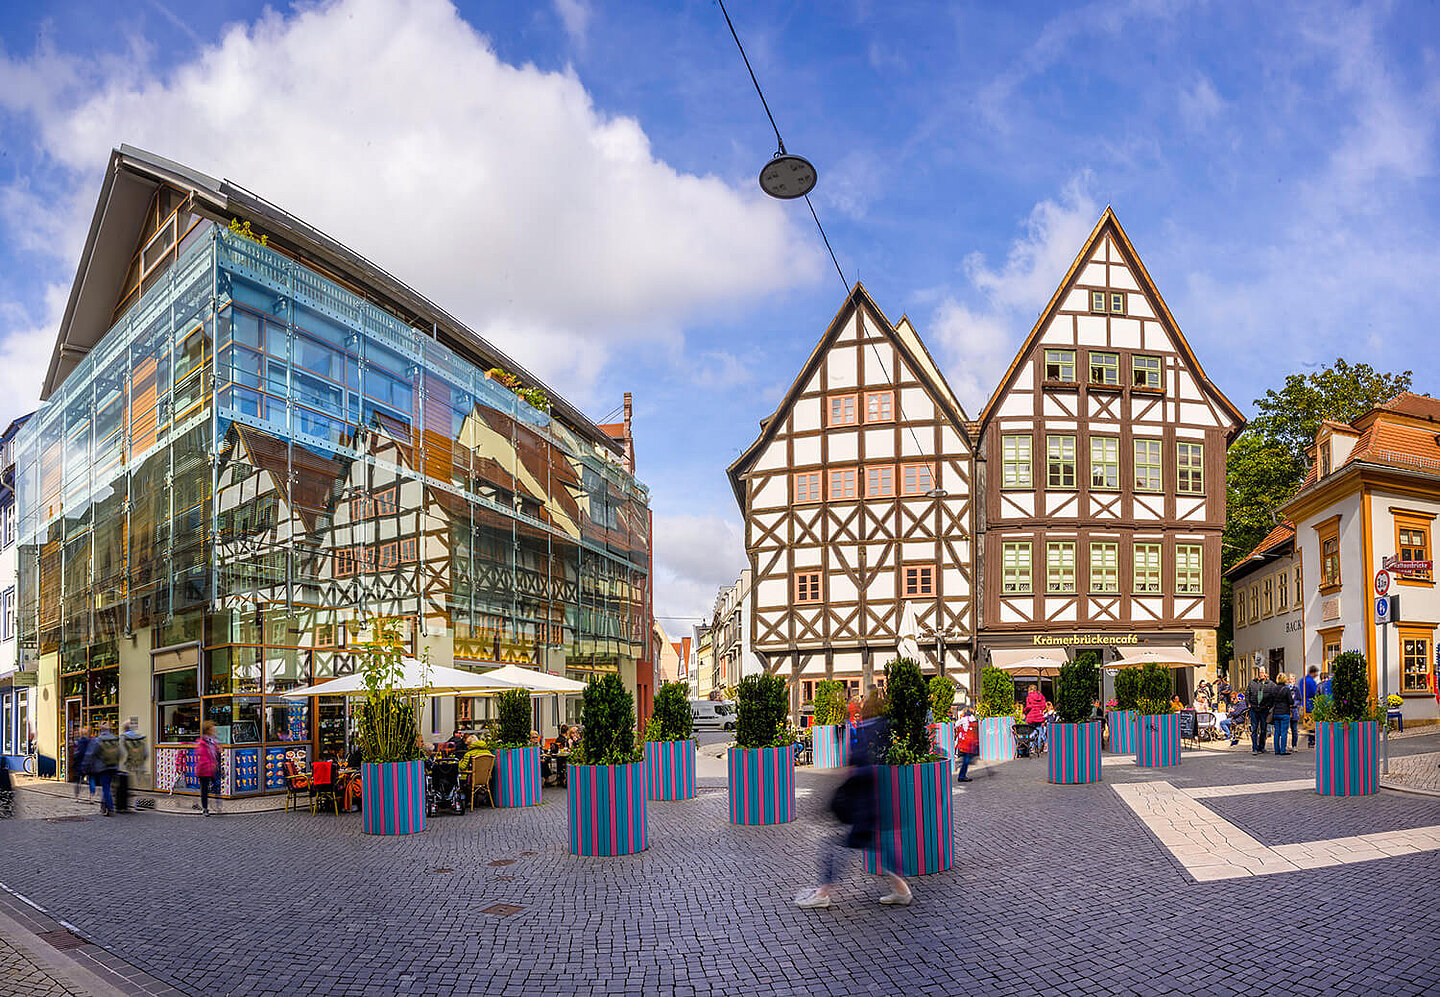 A modern and two old half-timbered houses on the Krämerbrücke, in front of which are planted flower pots